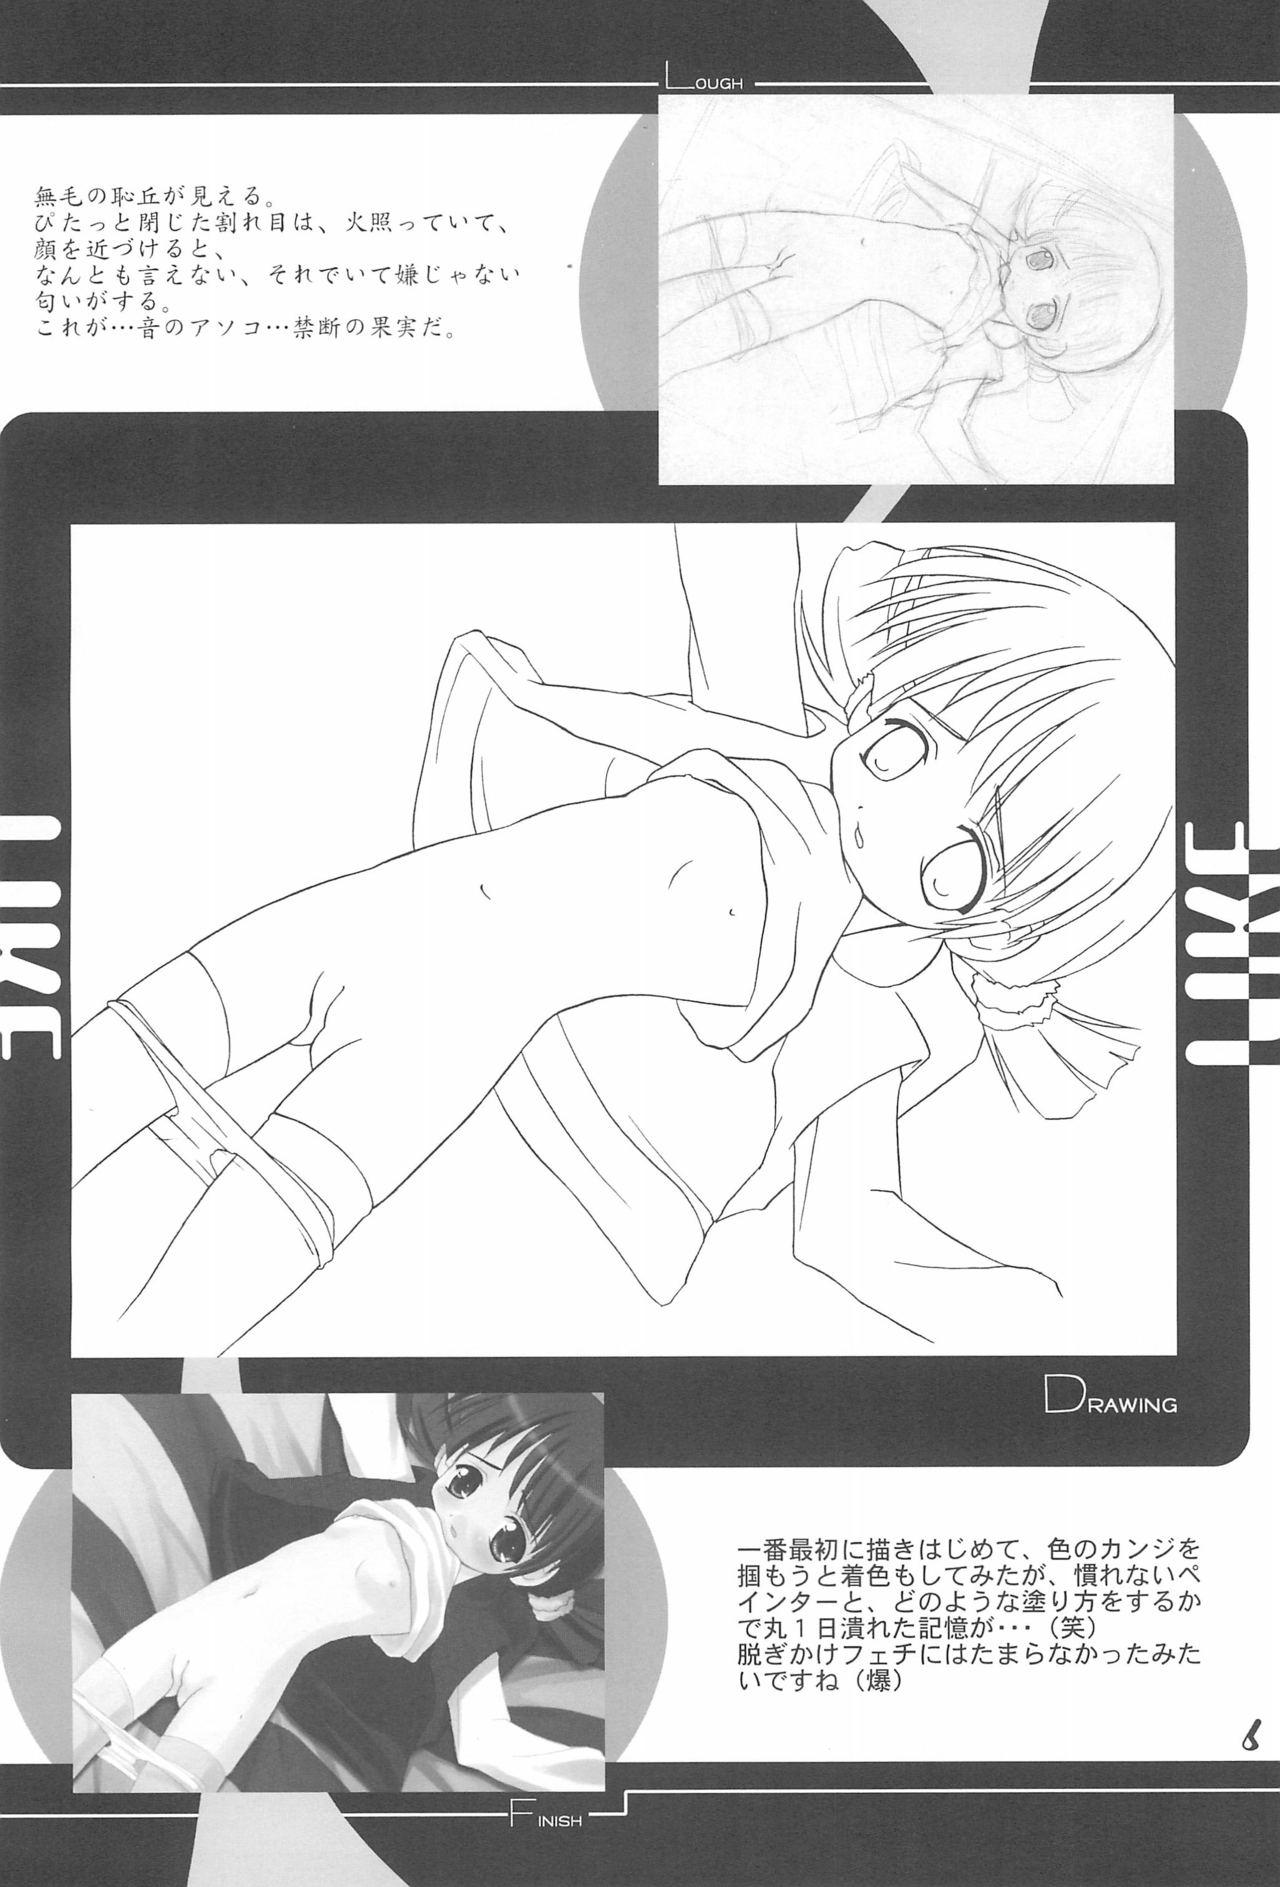 Hunks (C59) [Oden-ya (Misooden)] LIKE 1-2-3+ Imouto - Original Jerking - Page 6